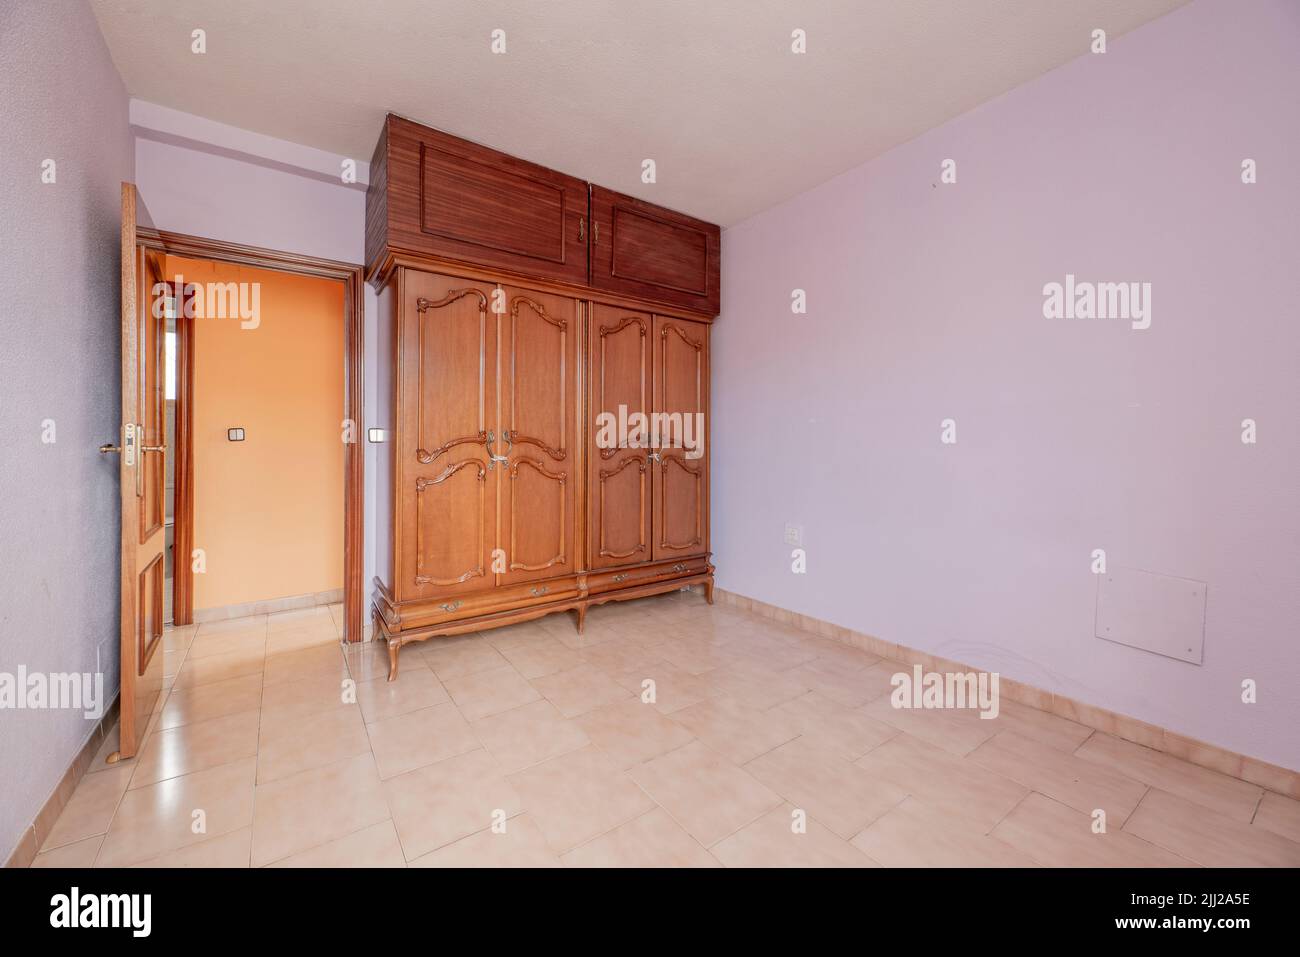 Empty room with pink stoneware floor, light purple painted walls and matching woodwork and wooden cabinets with abandoned chests Stock Photo